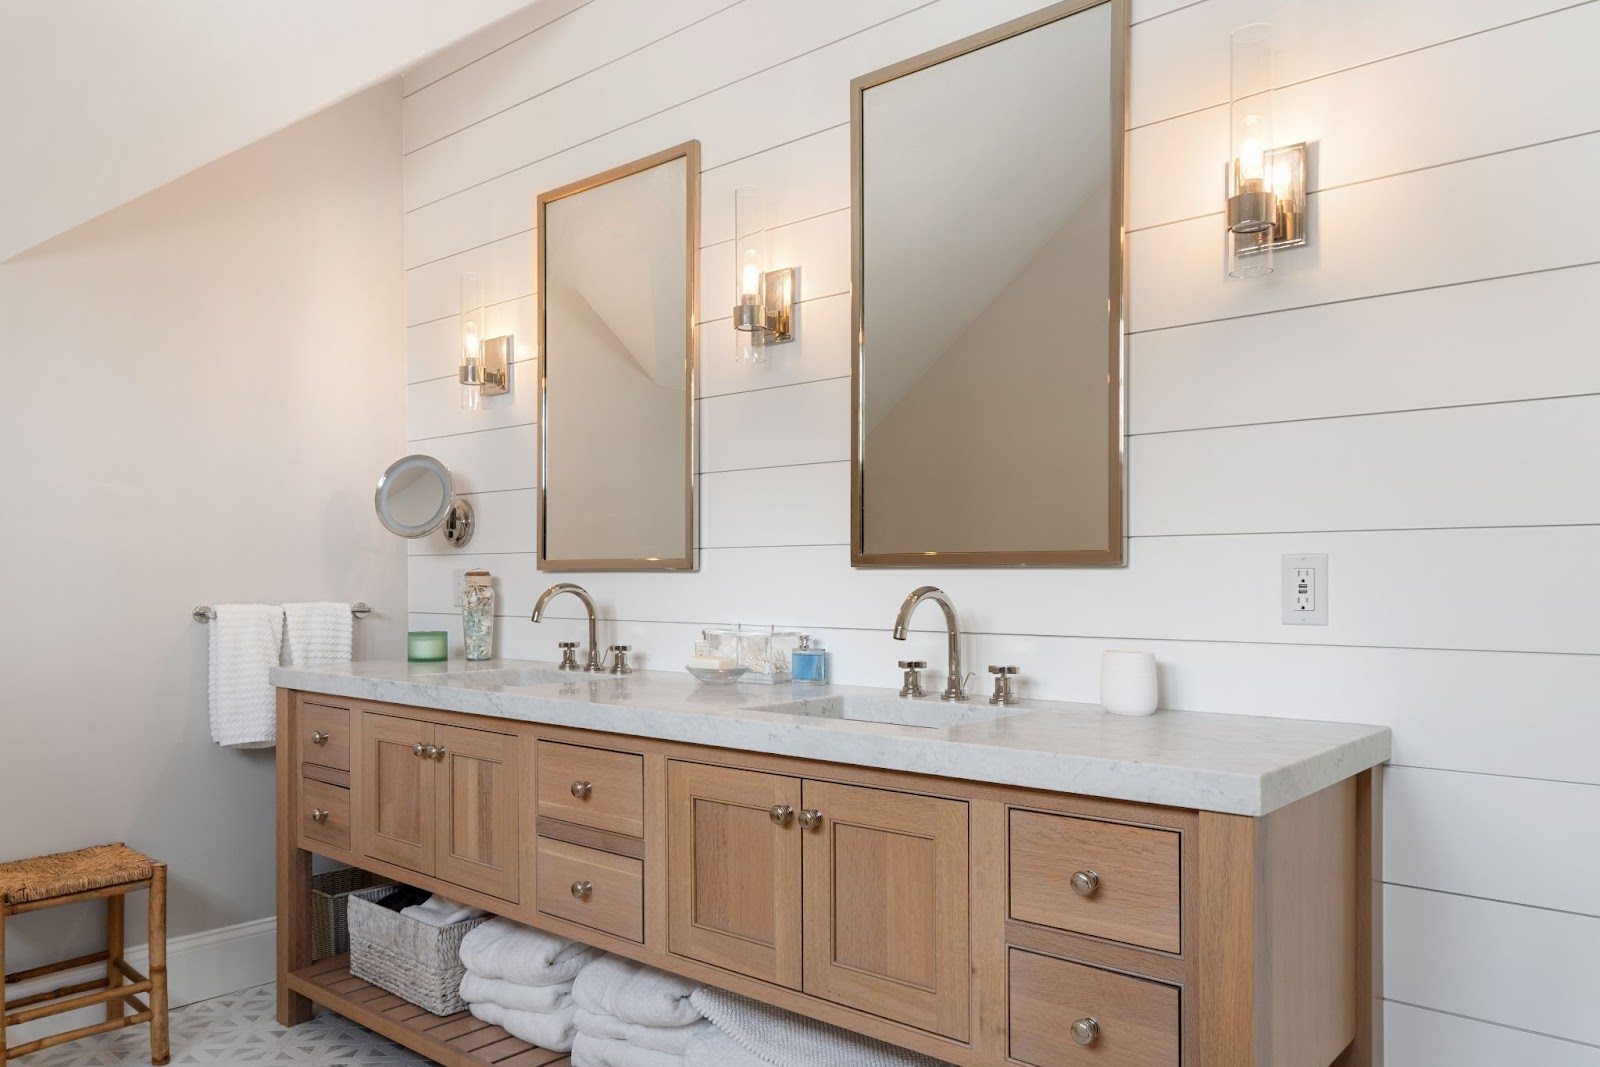 The picture depicts a sleek, white bathroom with two “vessel-style” sinks and 2 vertical mirrors.